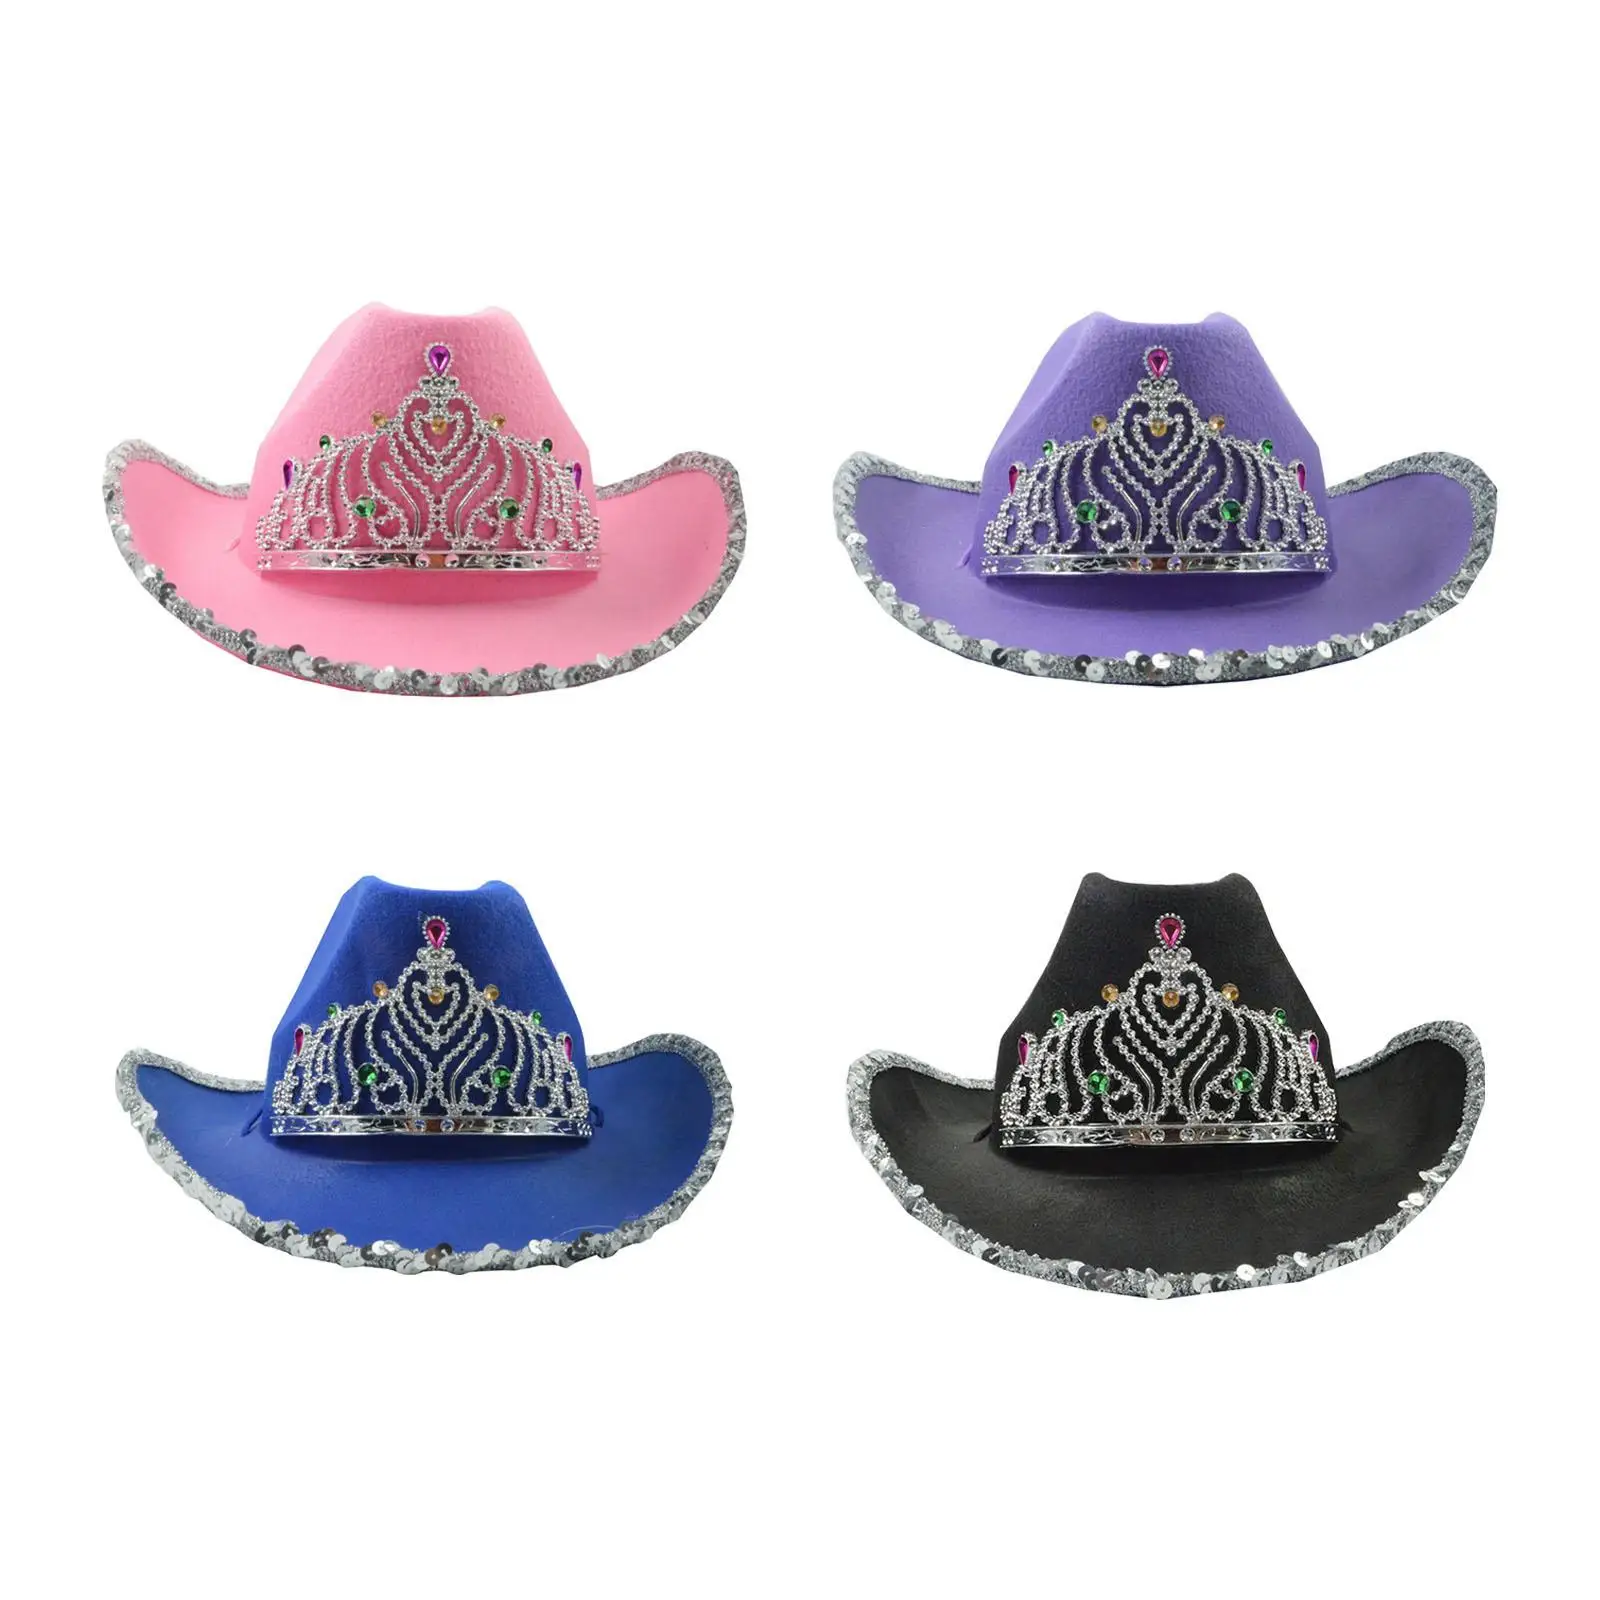 Western Accessories Cowgirl Costume Cowboy Hat Big Crown Felt Sequin Beaded Party Hats for Women